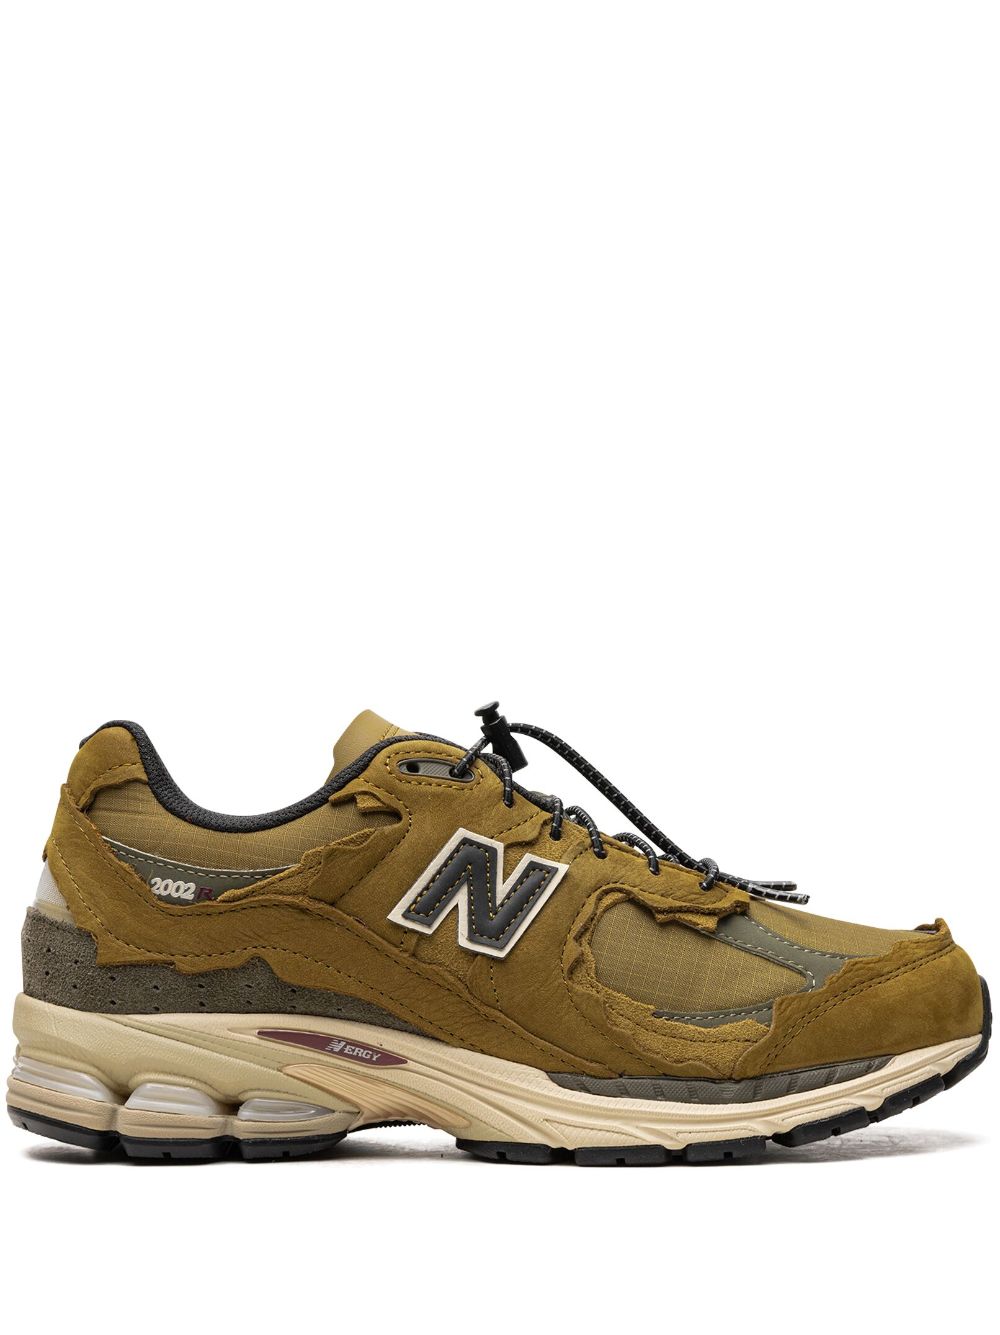 New Balance 2002R "Protection Pack - High Desert" sneakers - Brown